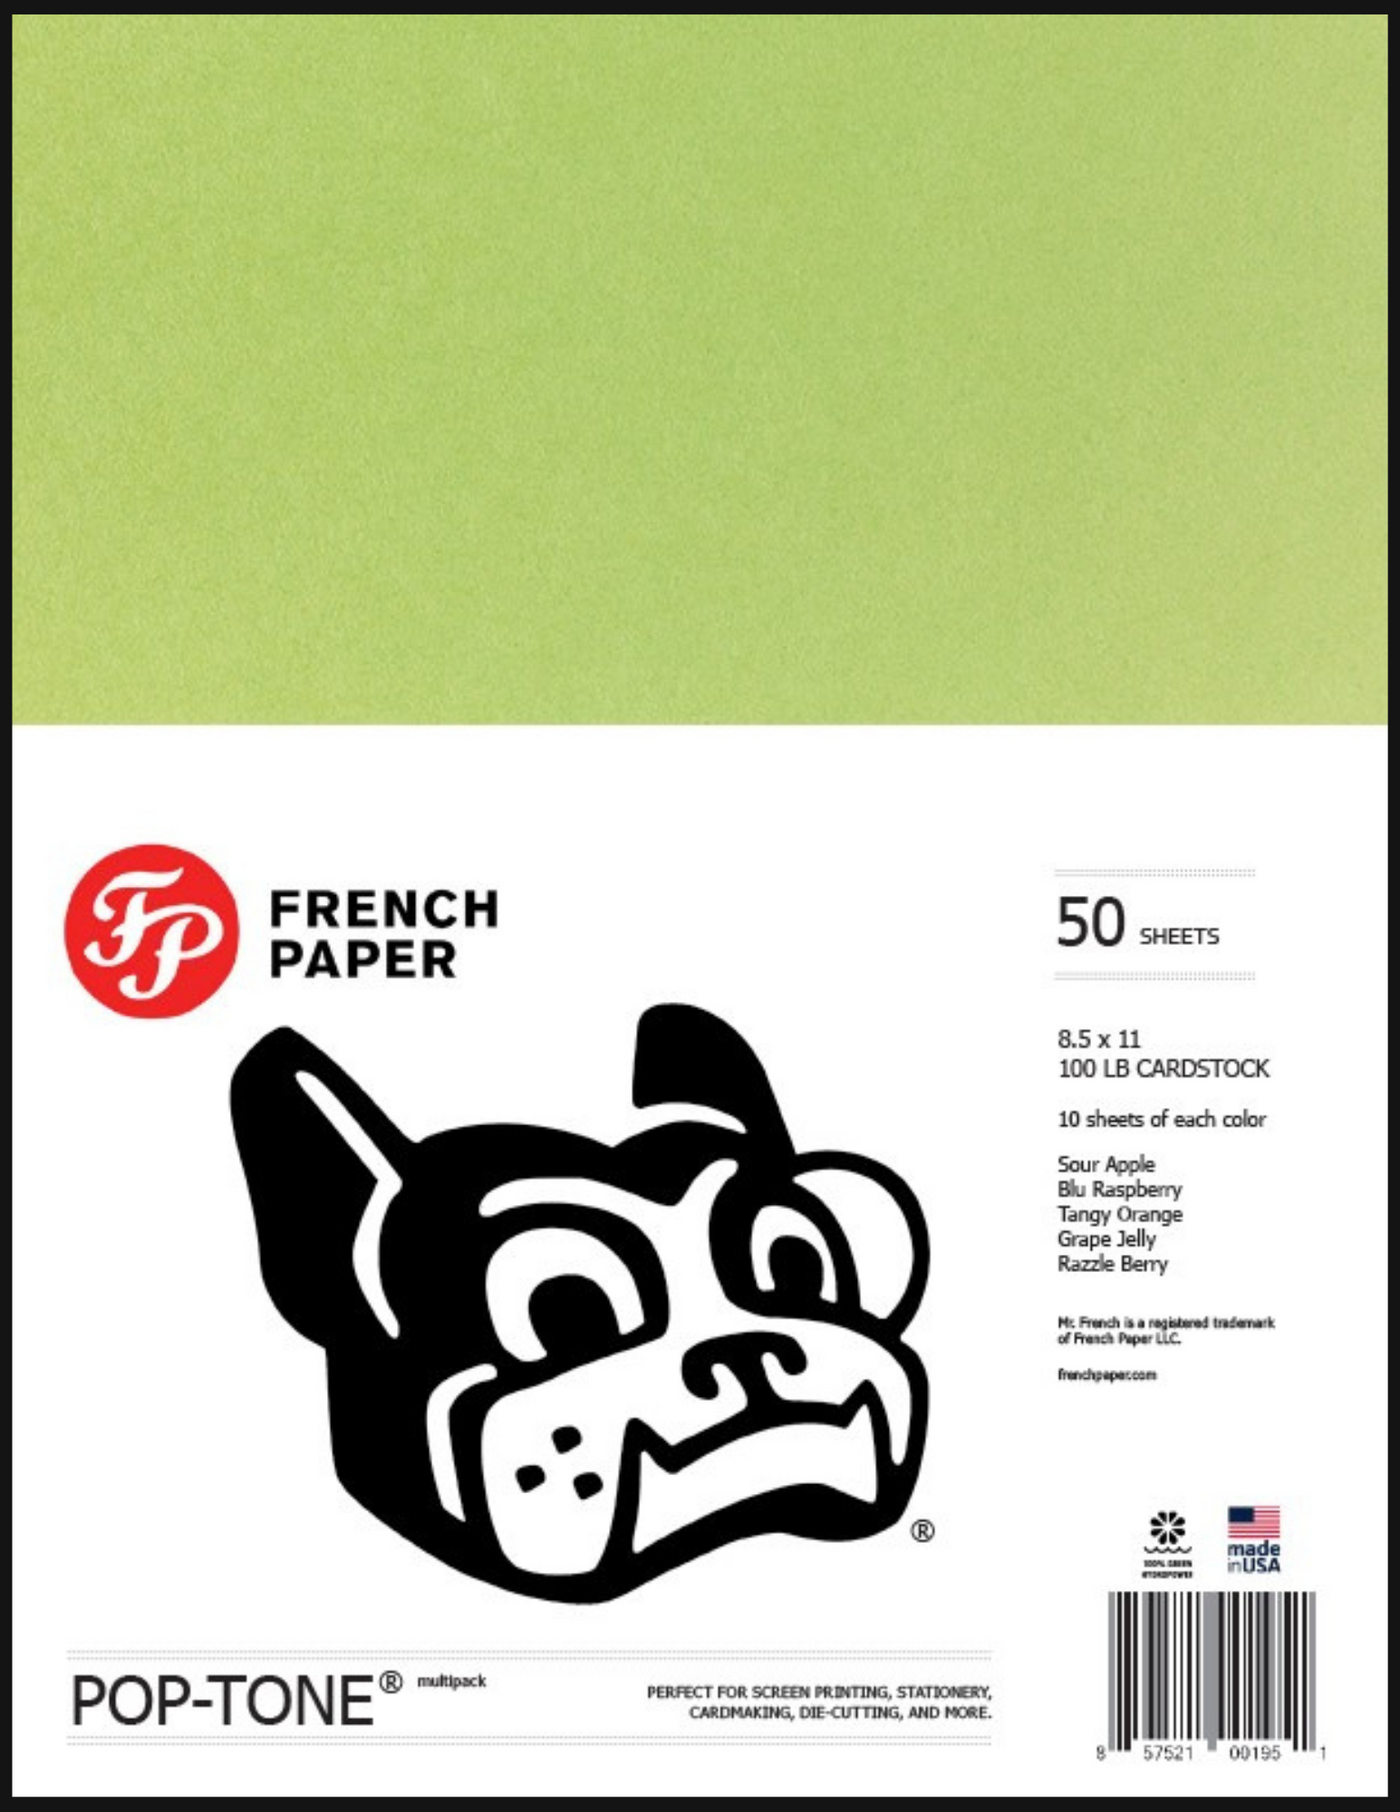 Pop-Tone Multipack – French Paper